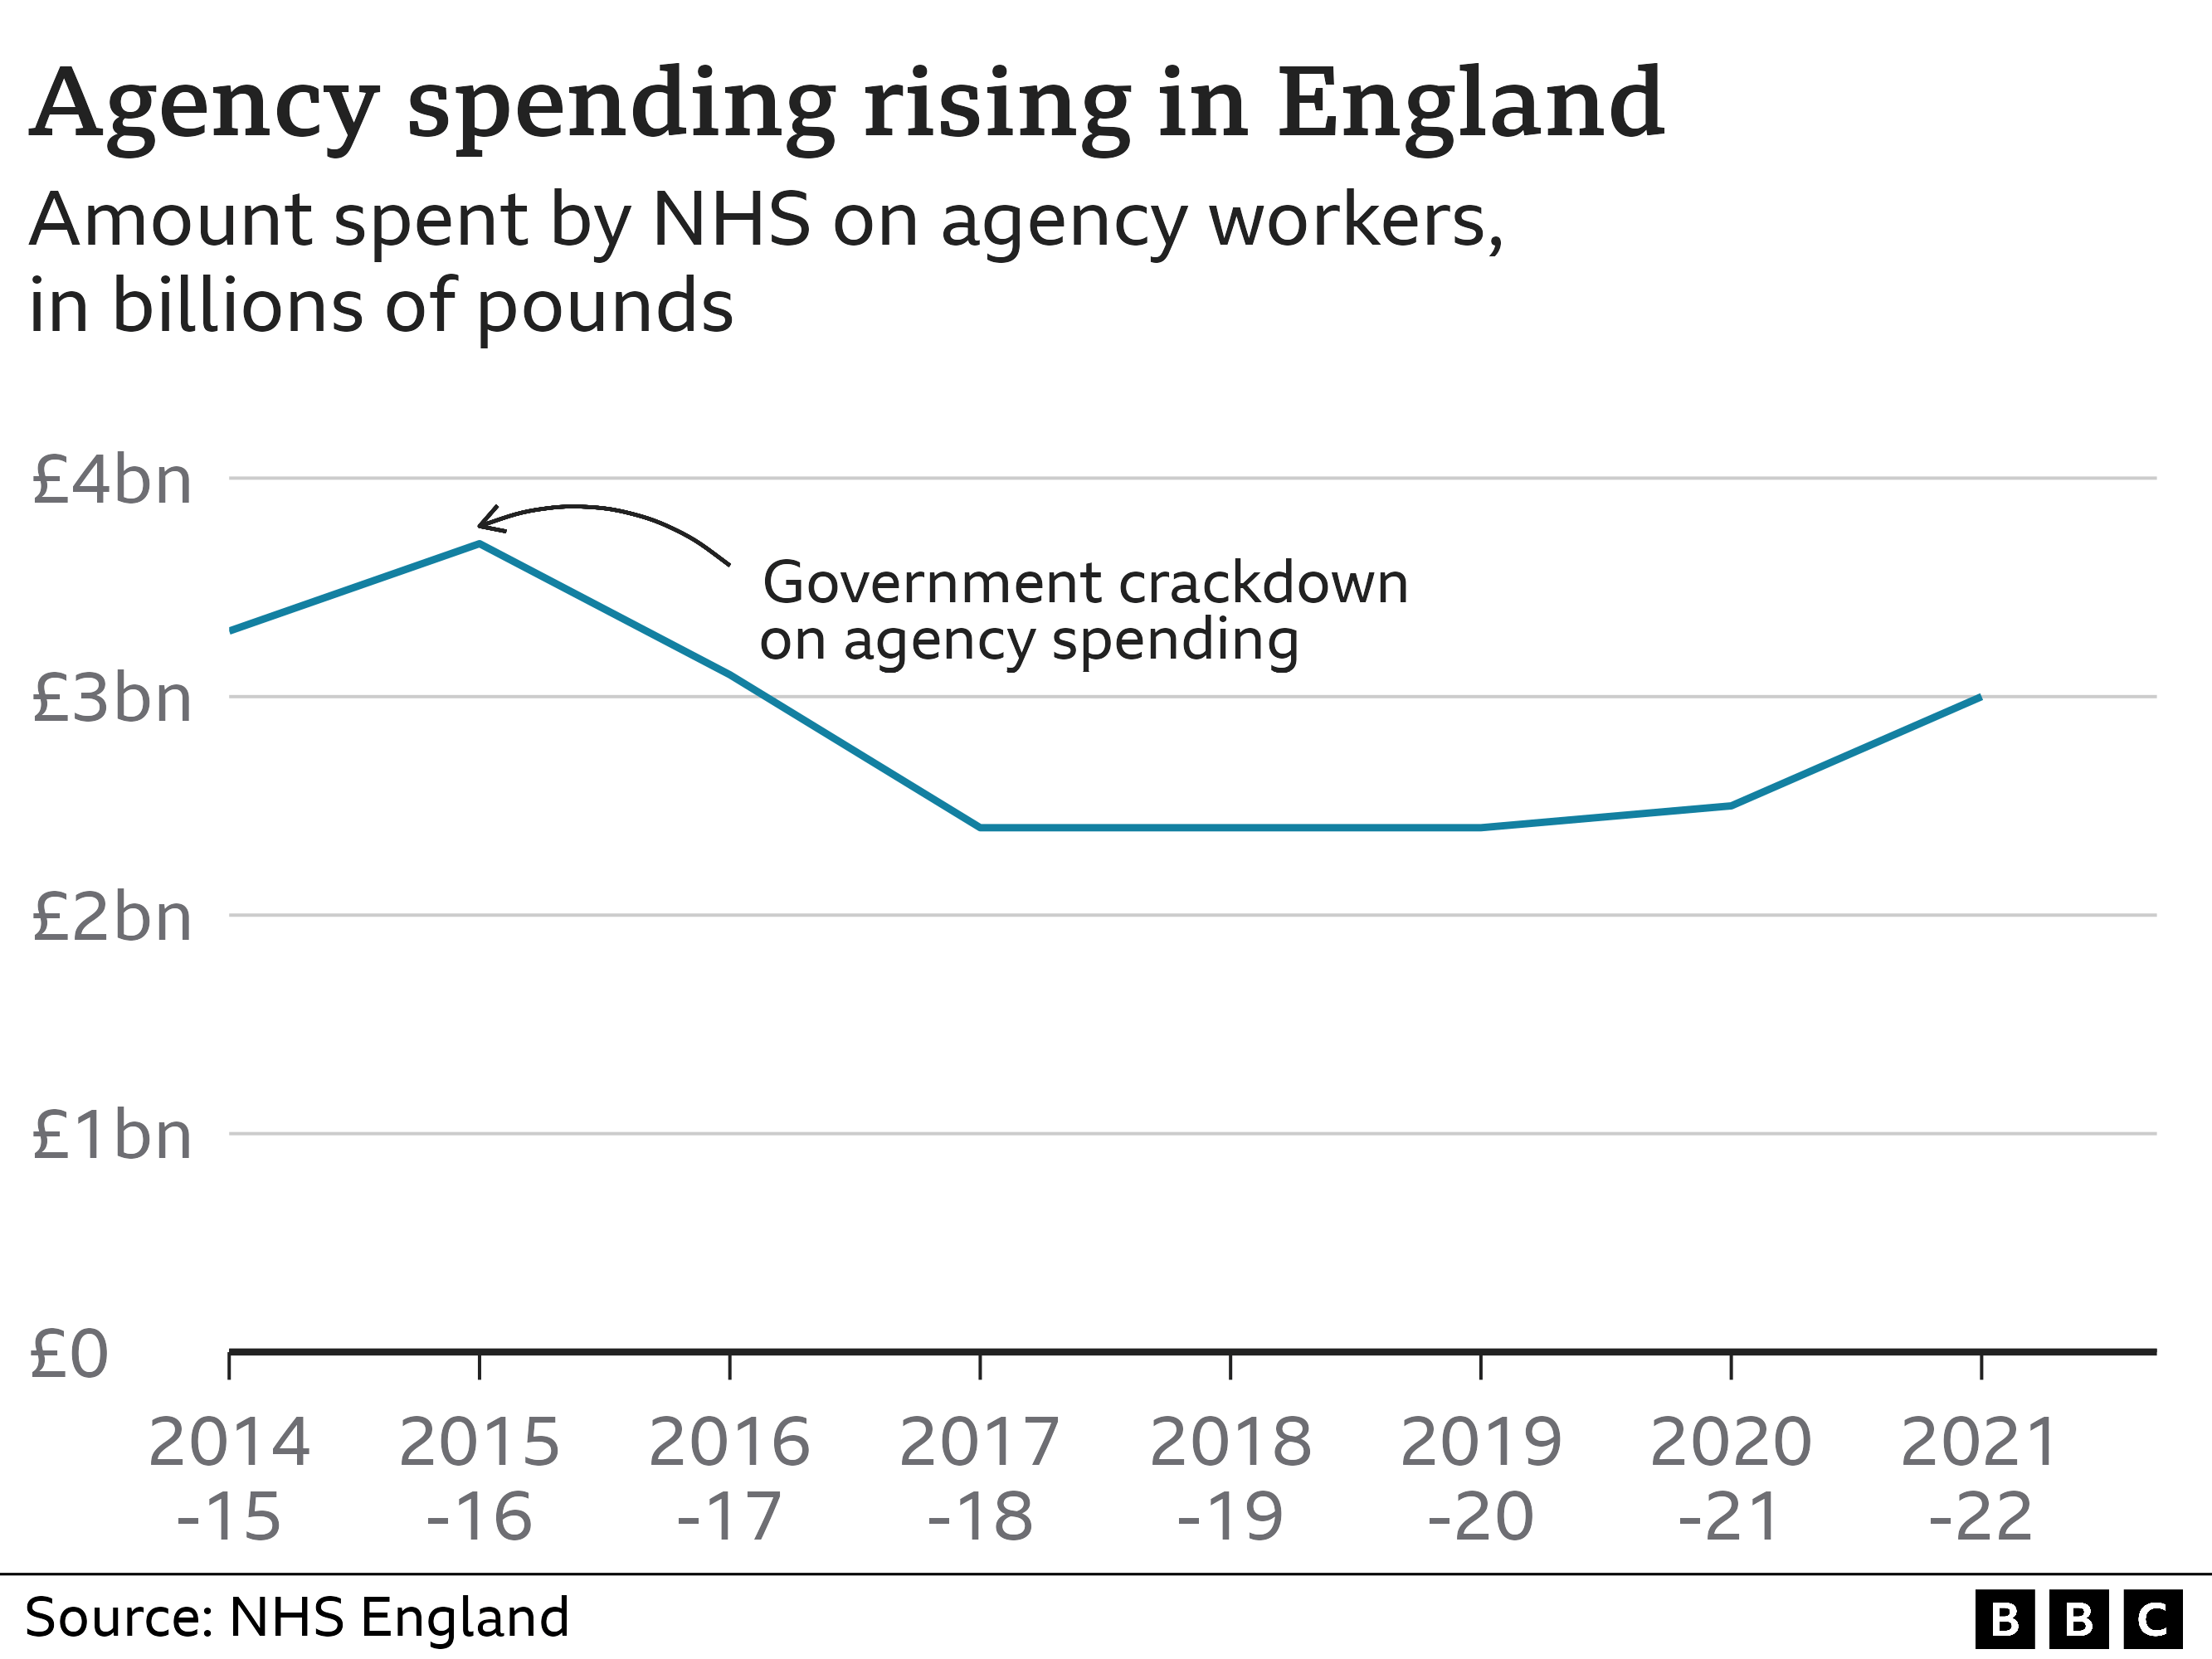 Chart showing agency spending